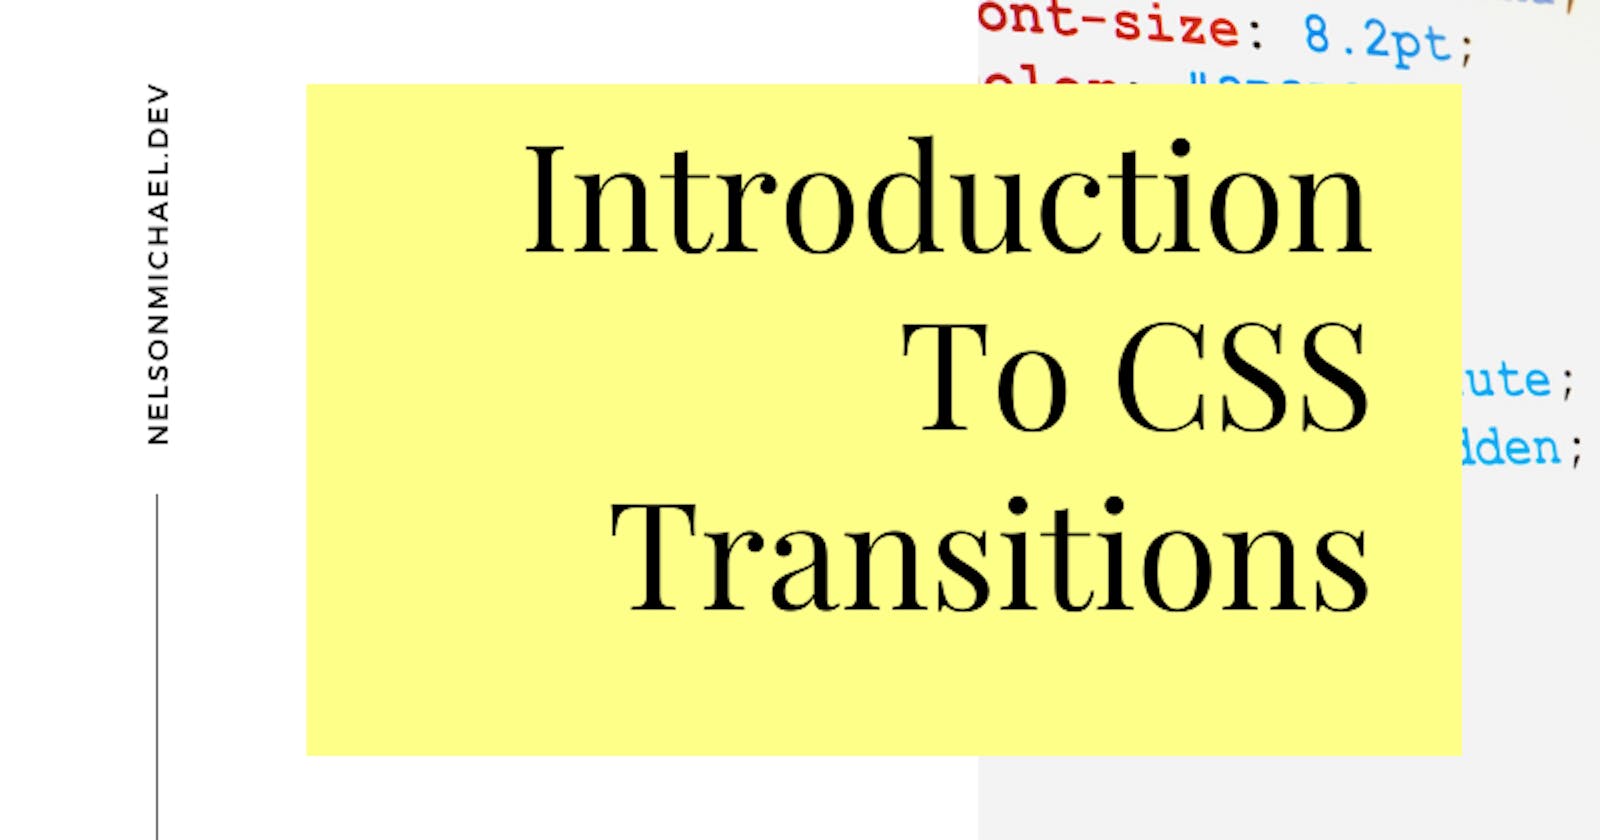 Introduction to CSS Transitions